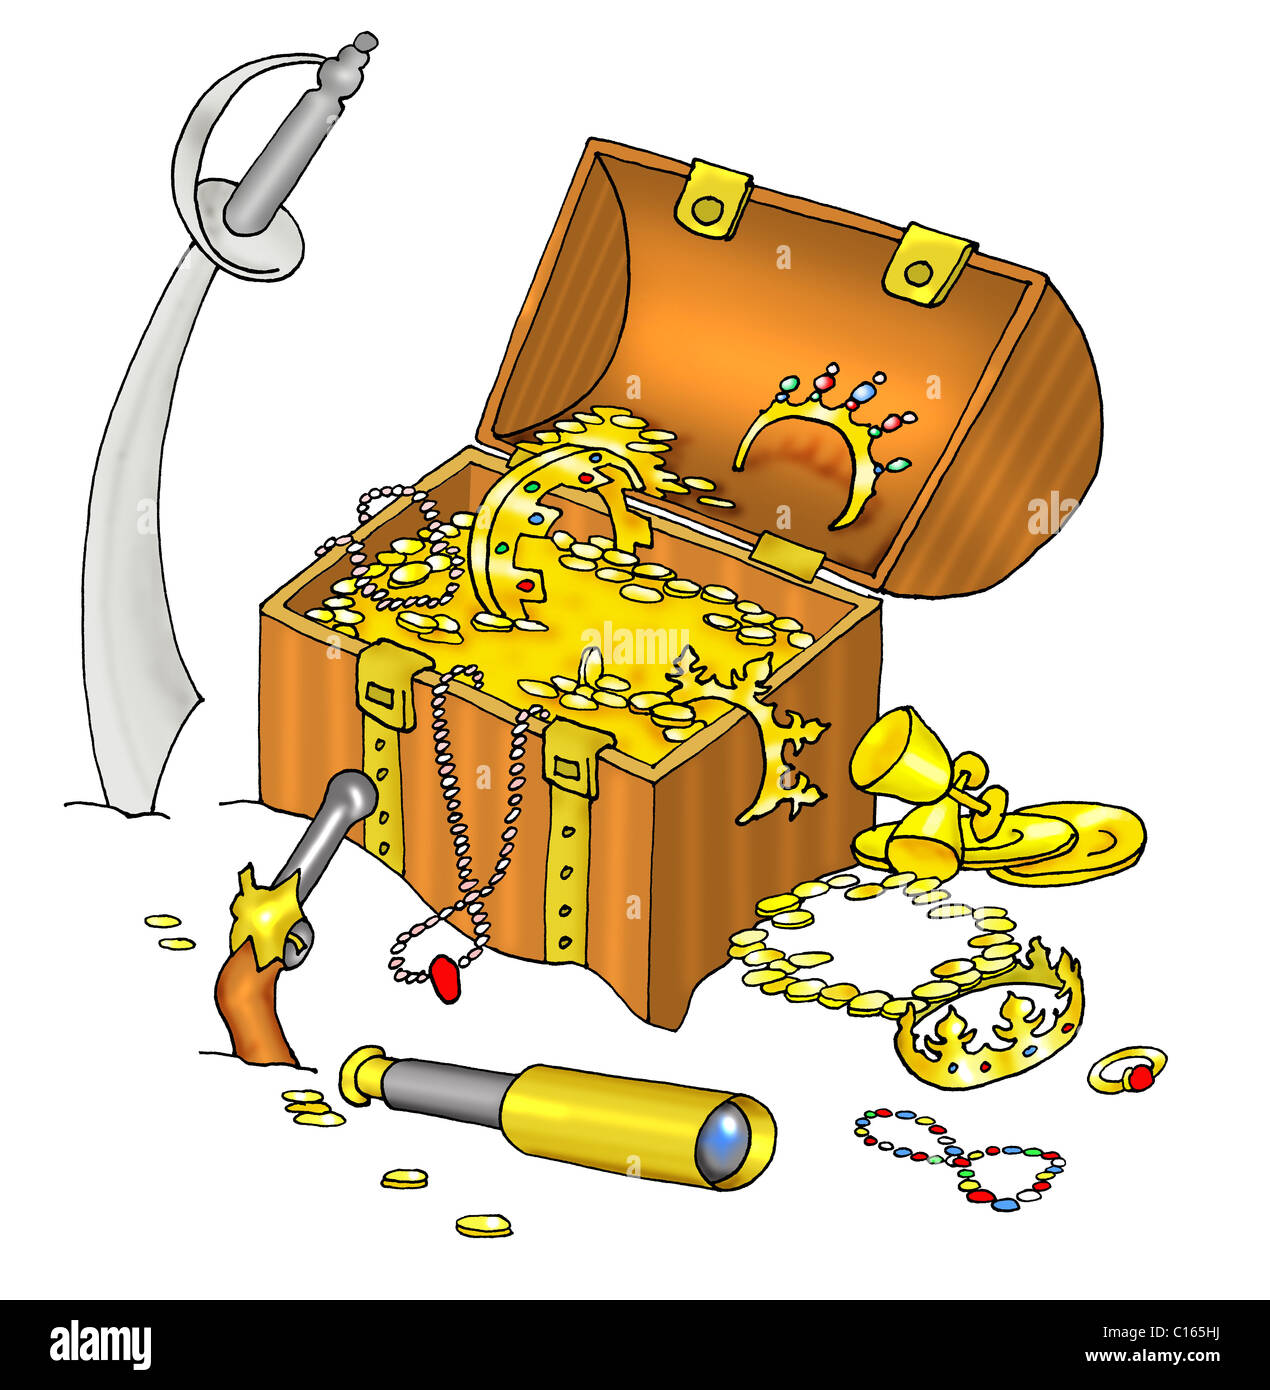 Pirate's treasure chest with gold, coins, crowns, cutlass and spyglass Stock Photo